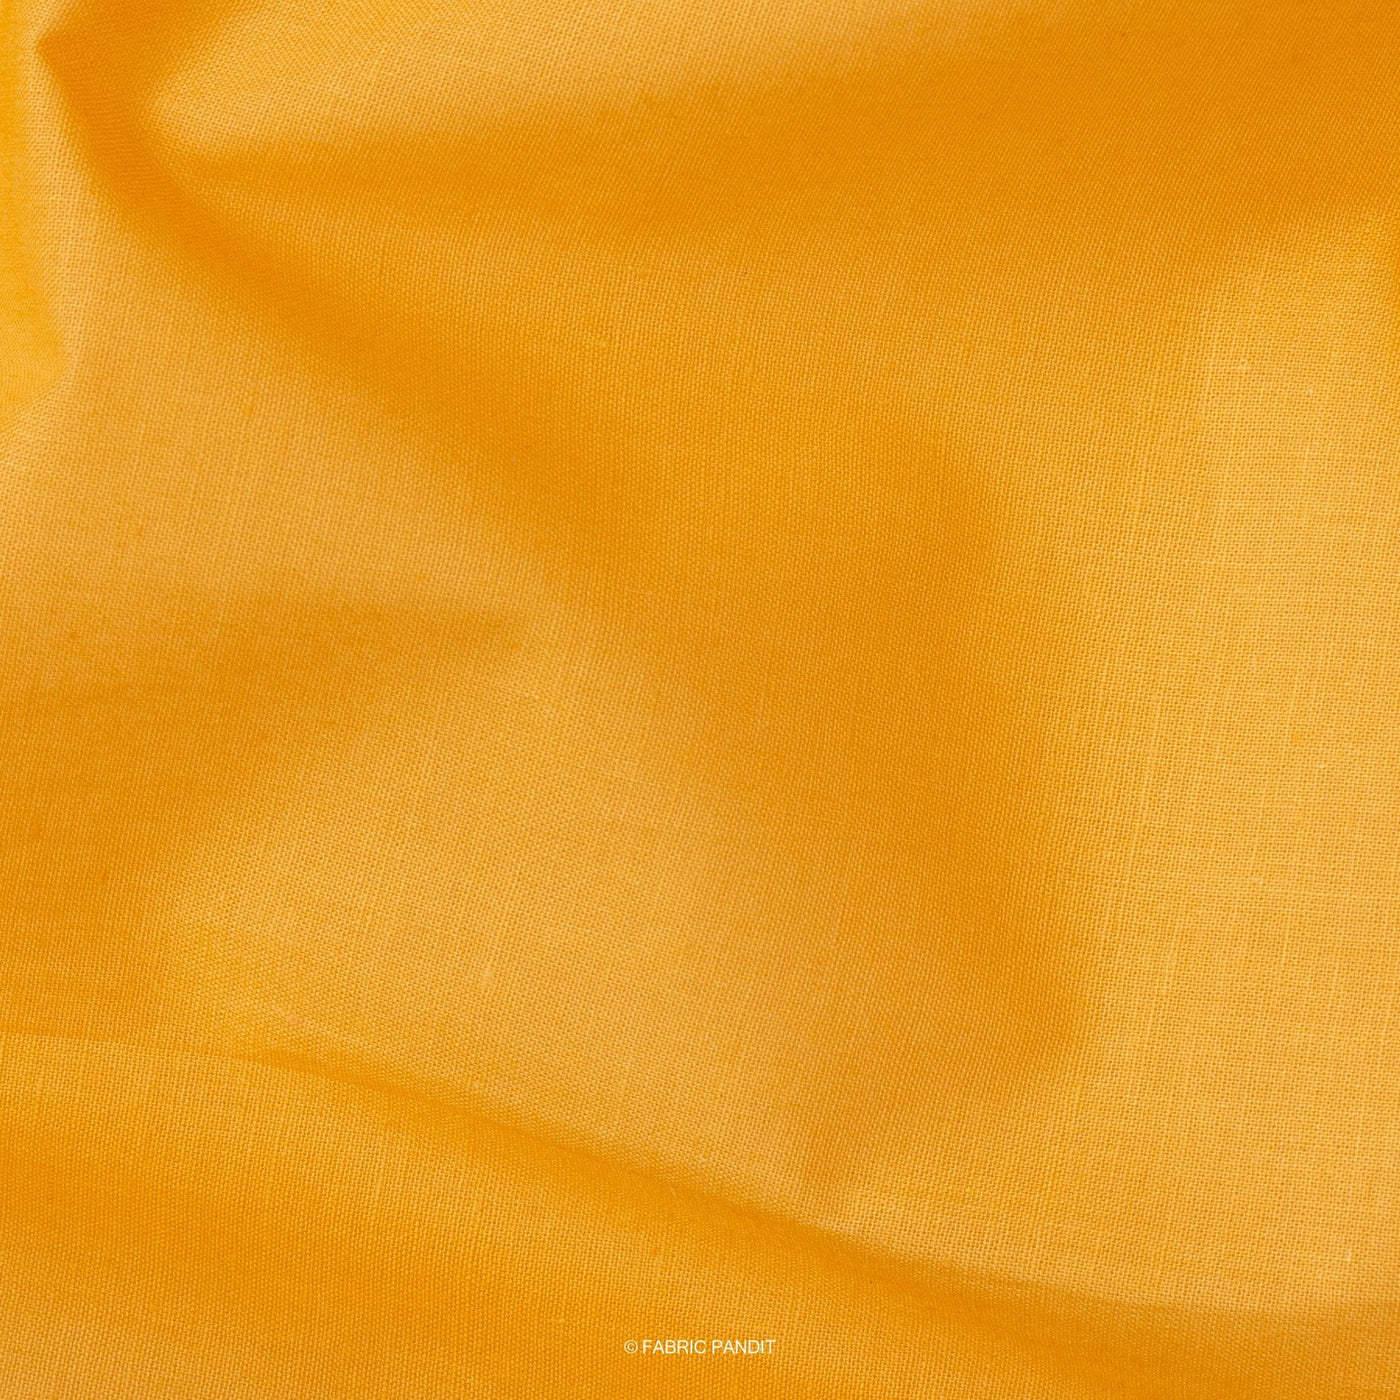 Fabric Pandit Fabric Amber Yellow Color Pure Cotton Cambric Fabric (Width 42 Inches)